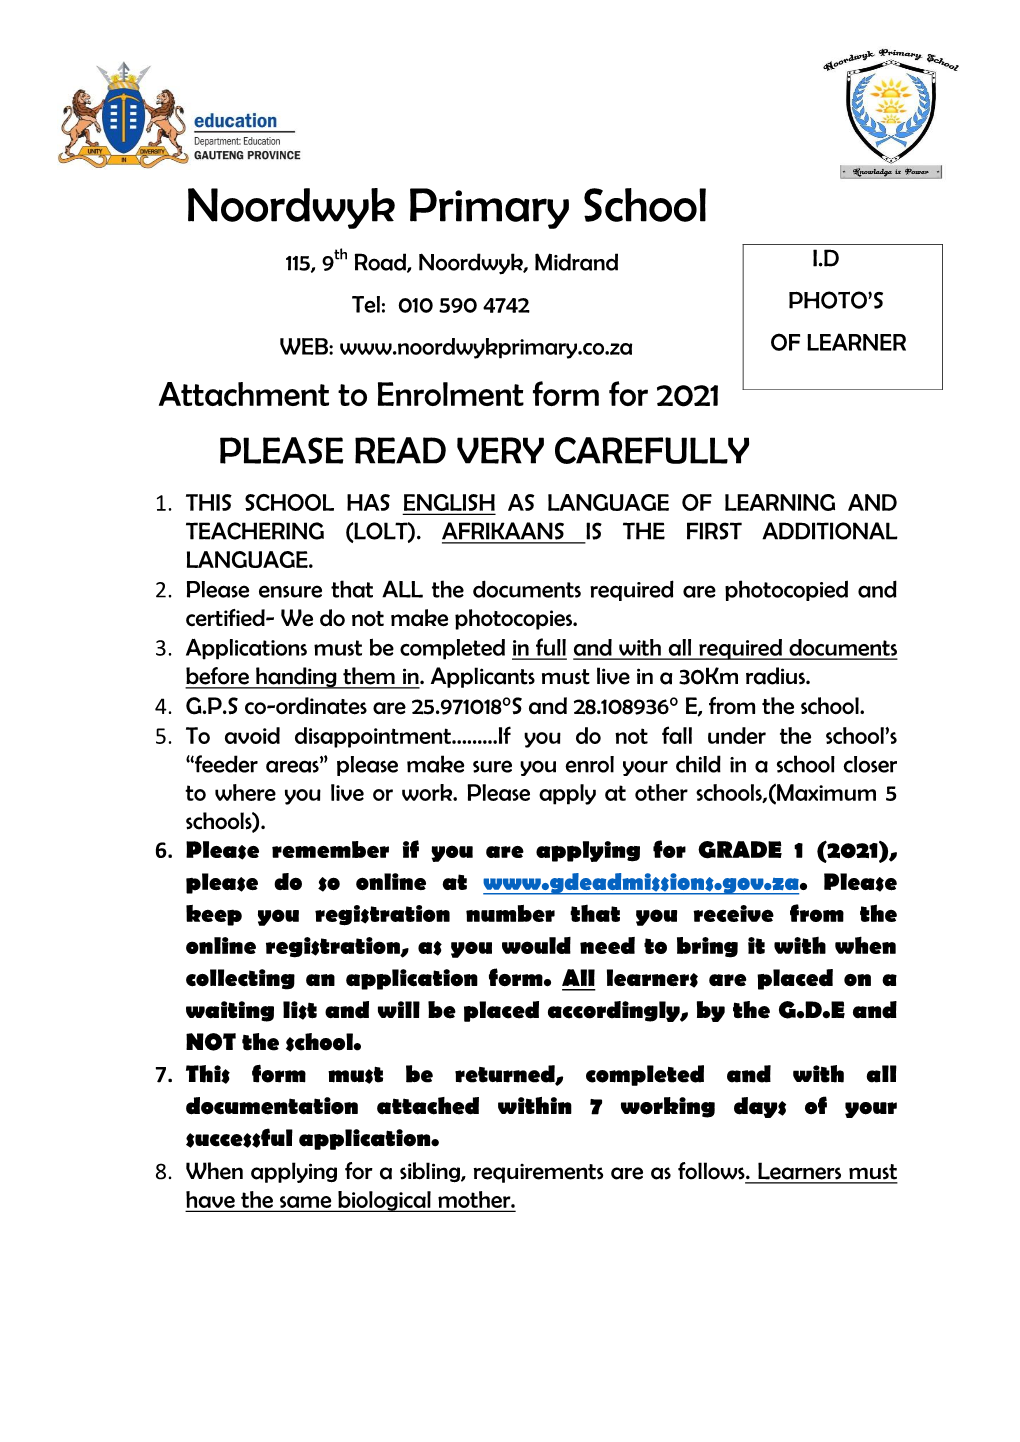 Attachment to Enrolment Form for 2021 PLEASE READ VERY CAREFULLY 1